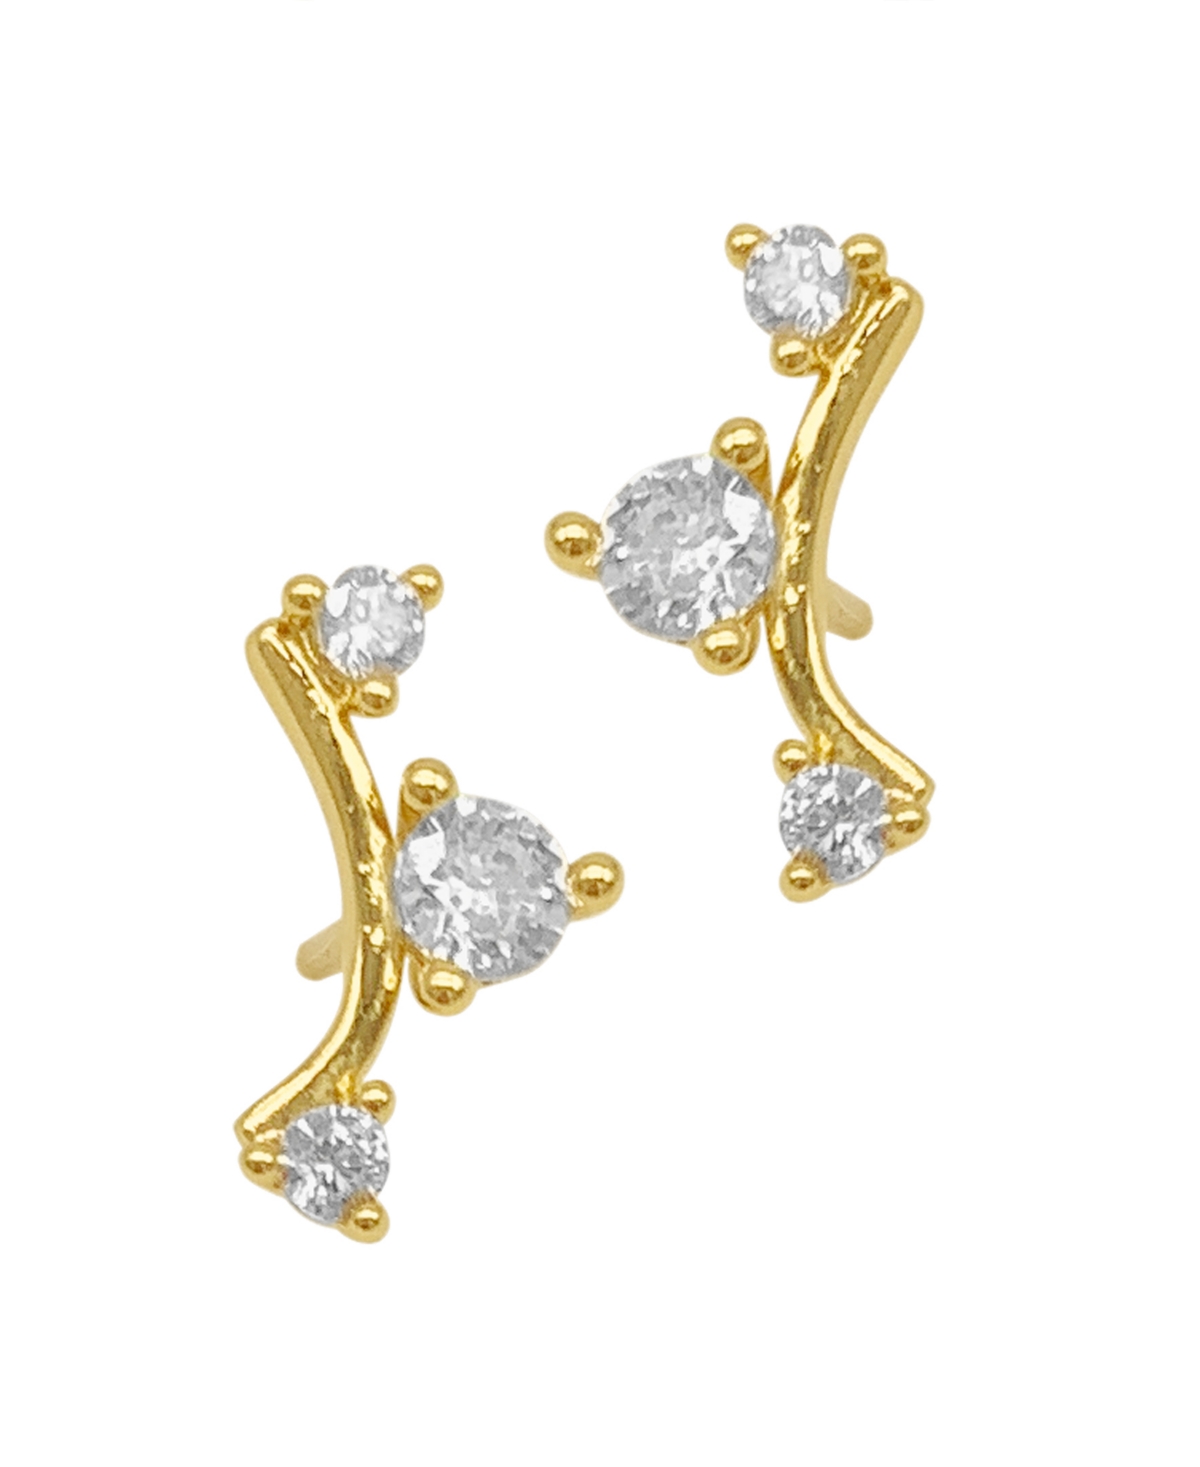 Studded Climber Earrings - Yellow Gold-Tone